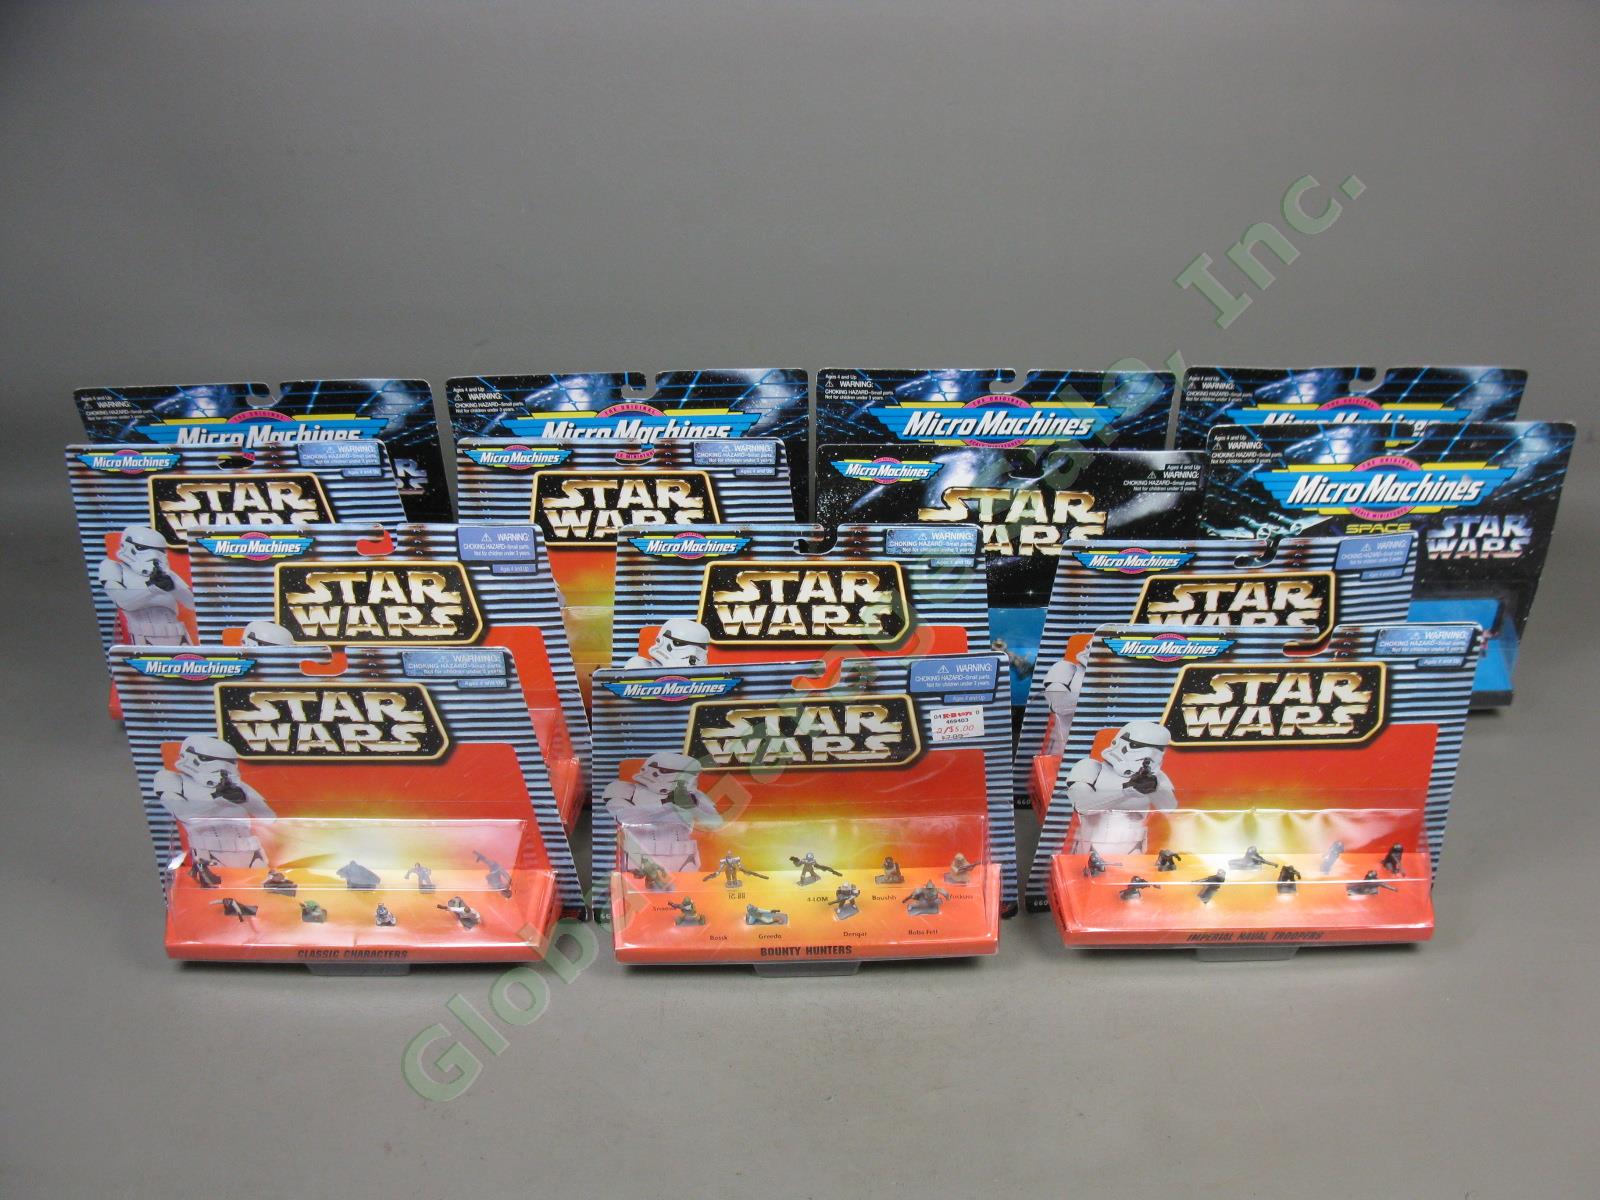 Full Complete Set 14 New Sealed Galoob Star Wars Micro Machines Figures Pack Lot